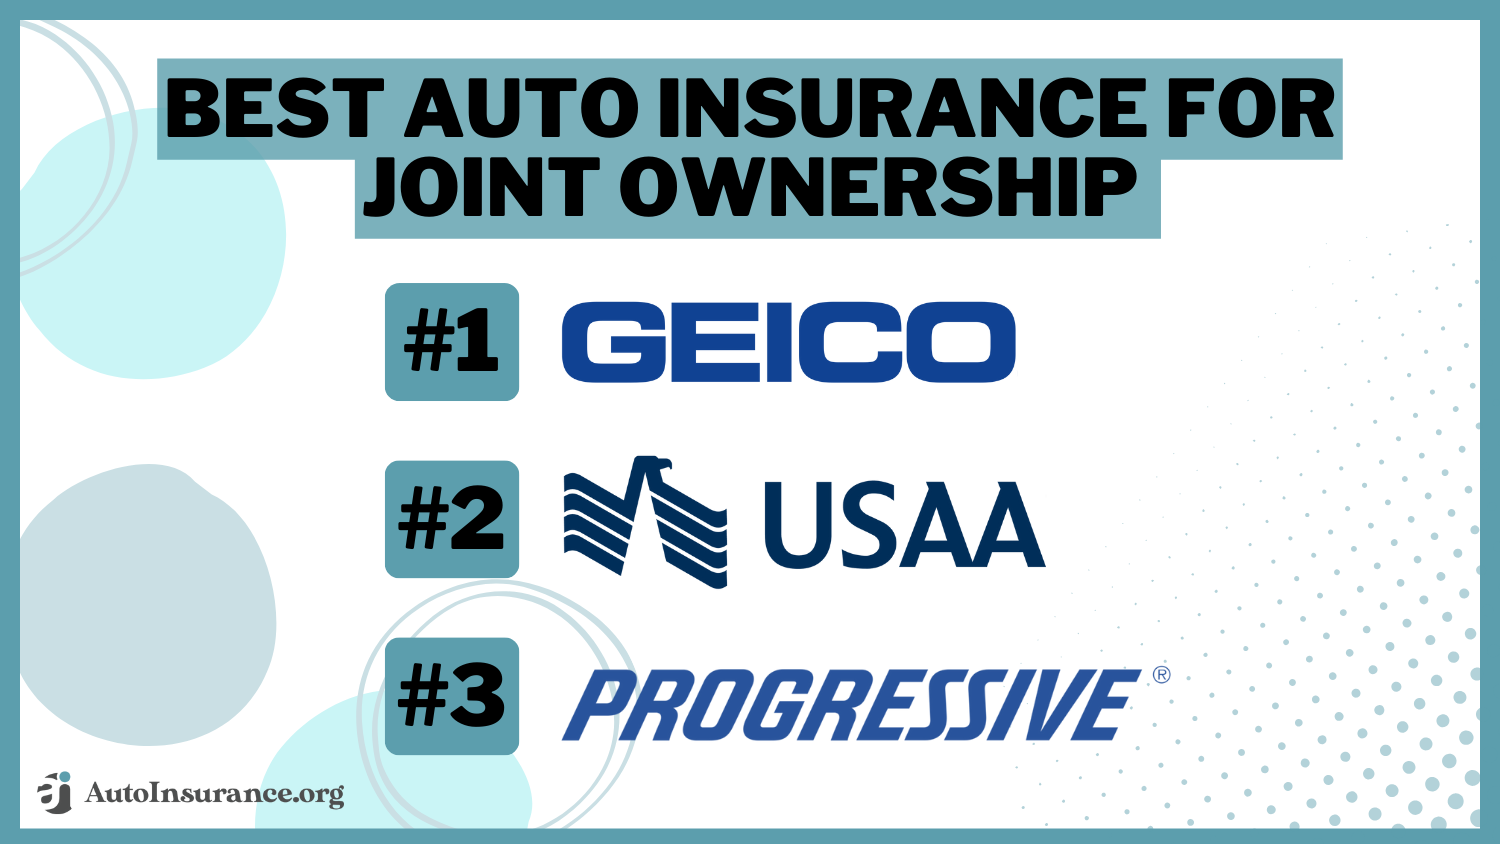 Best Auto Insurance for Joint Ownership - Geico, USAA, Progressive